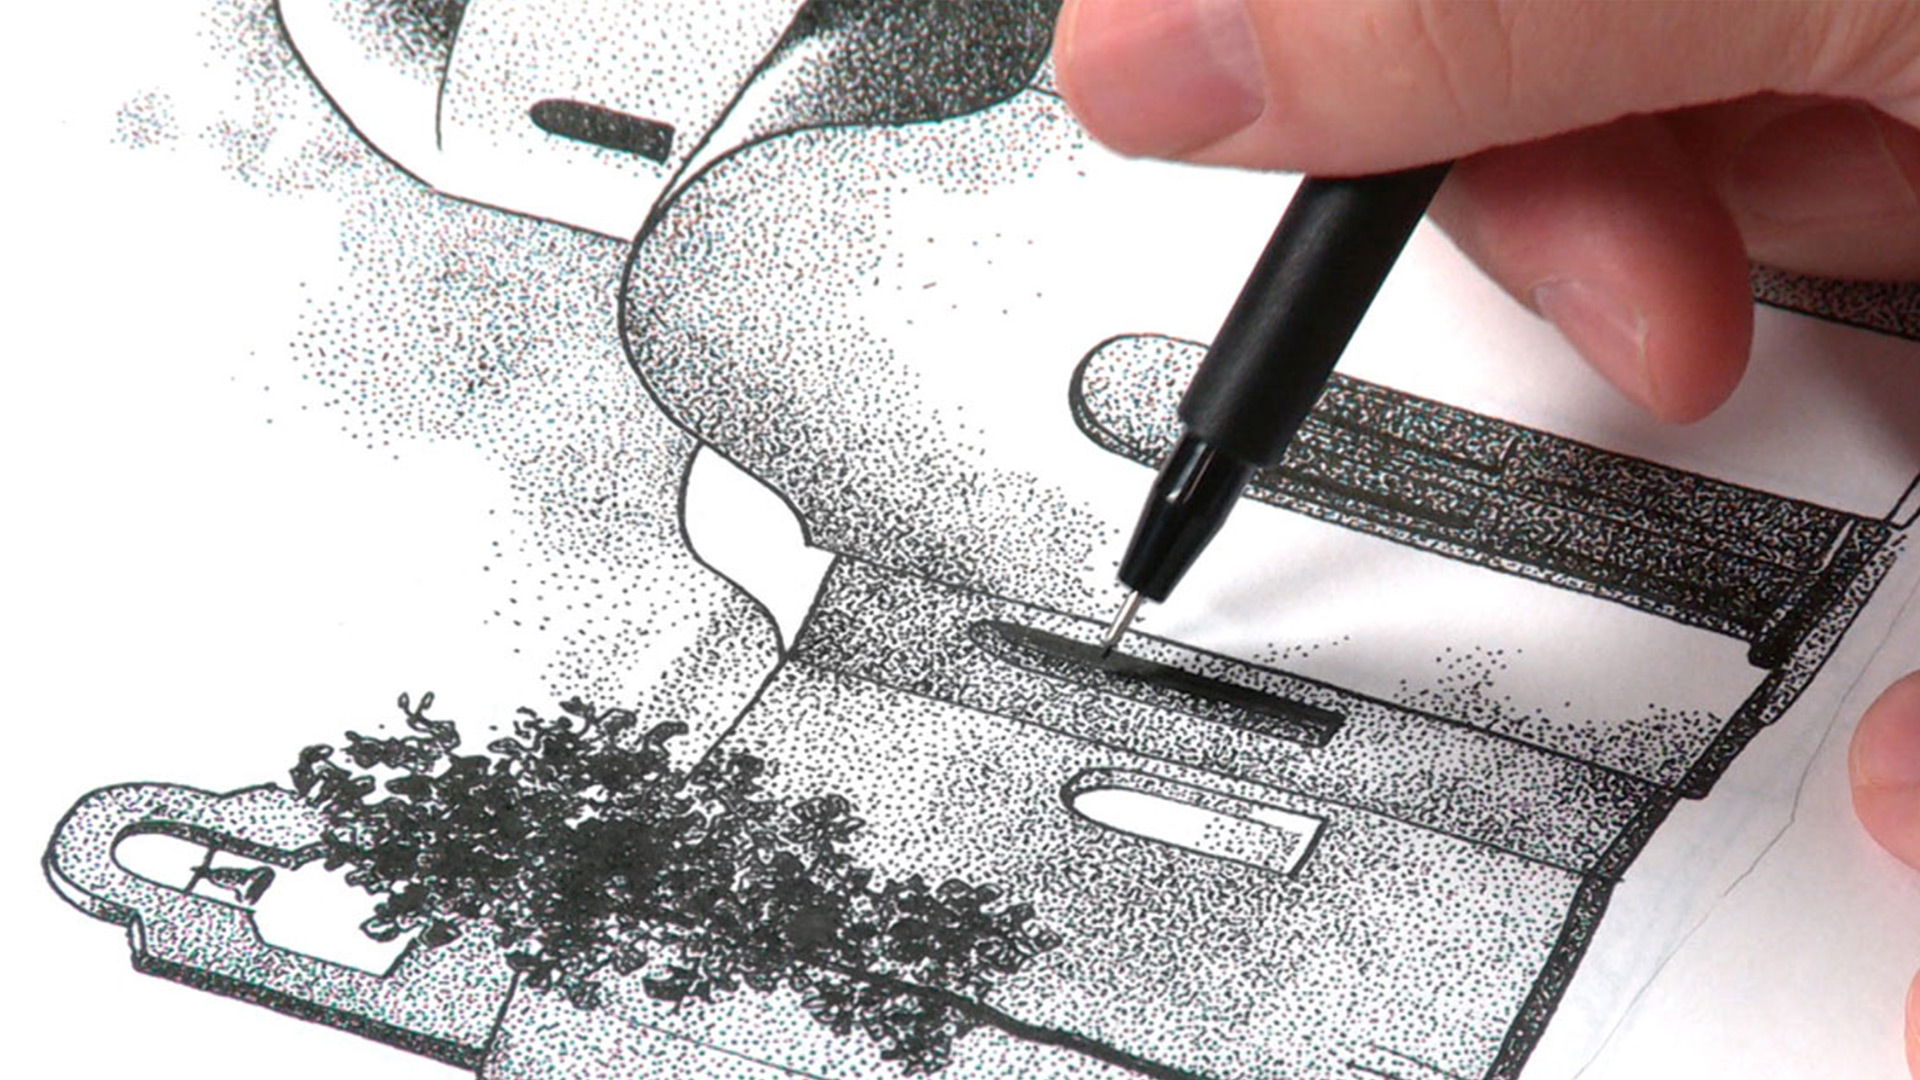 How to draw with ink - Artists & Illustrators